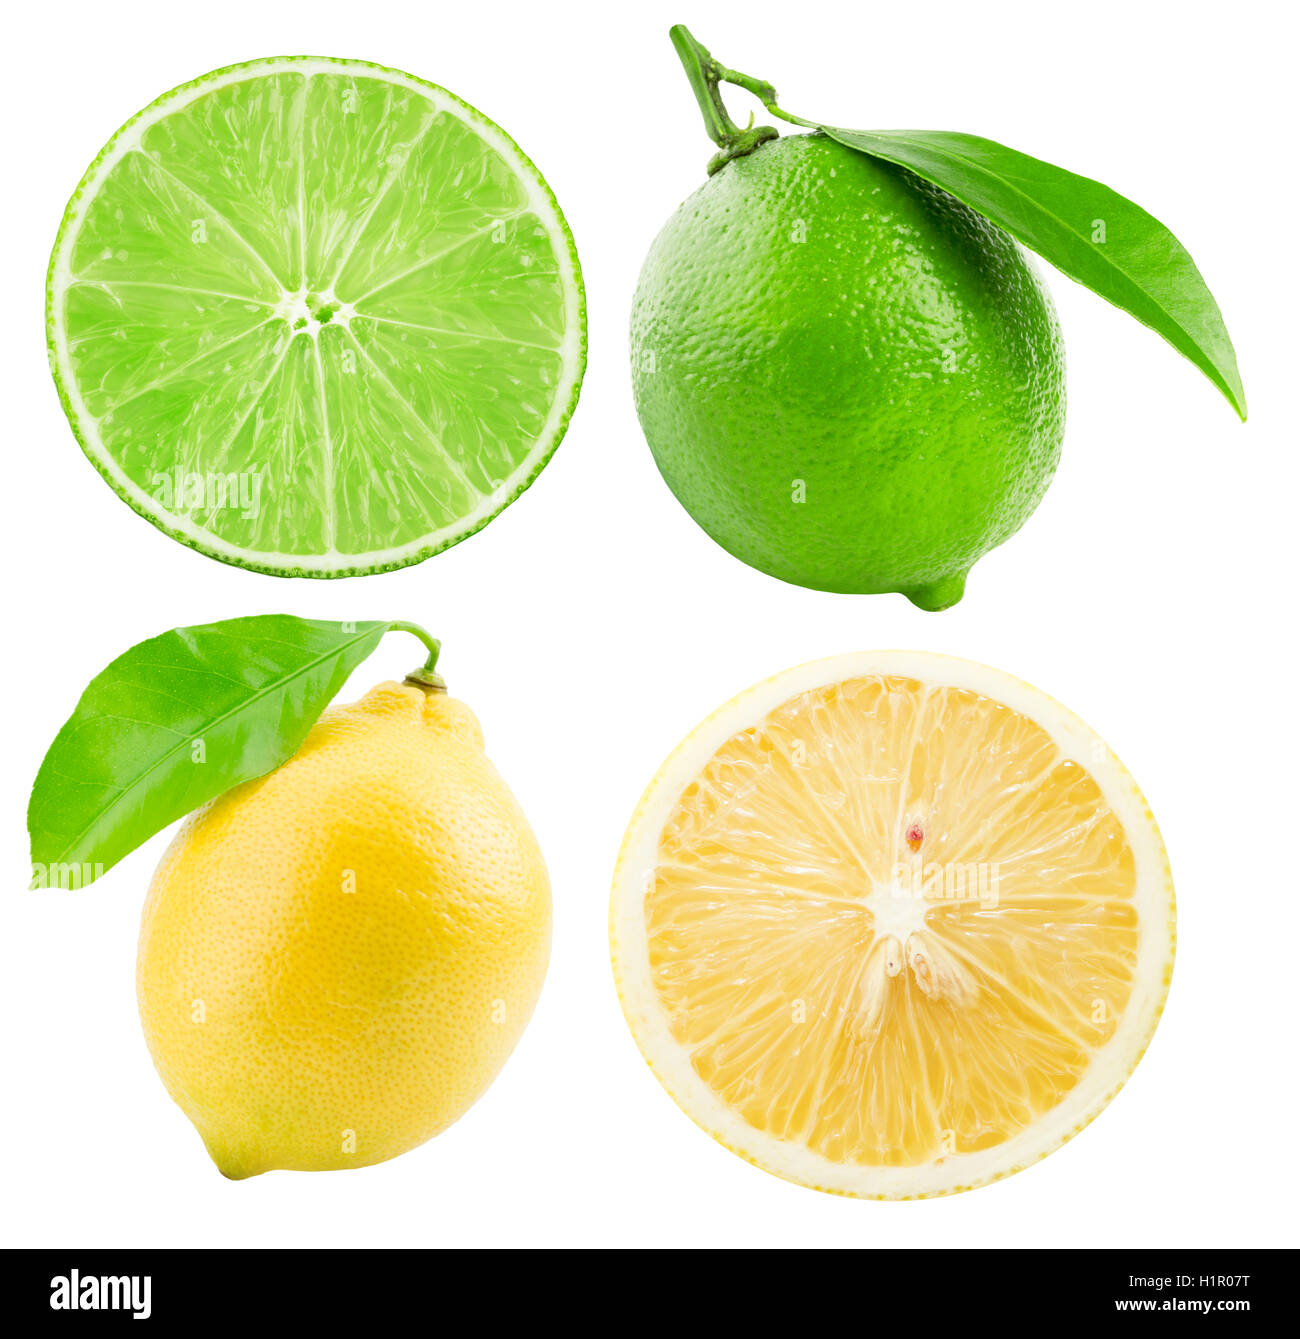 collection of limes and lemons isolated on the white background. Stock Photo